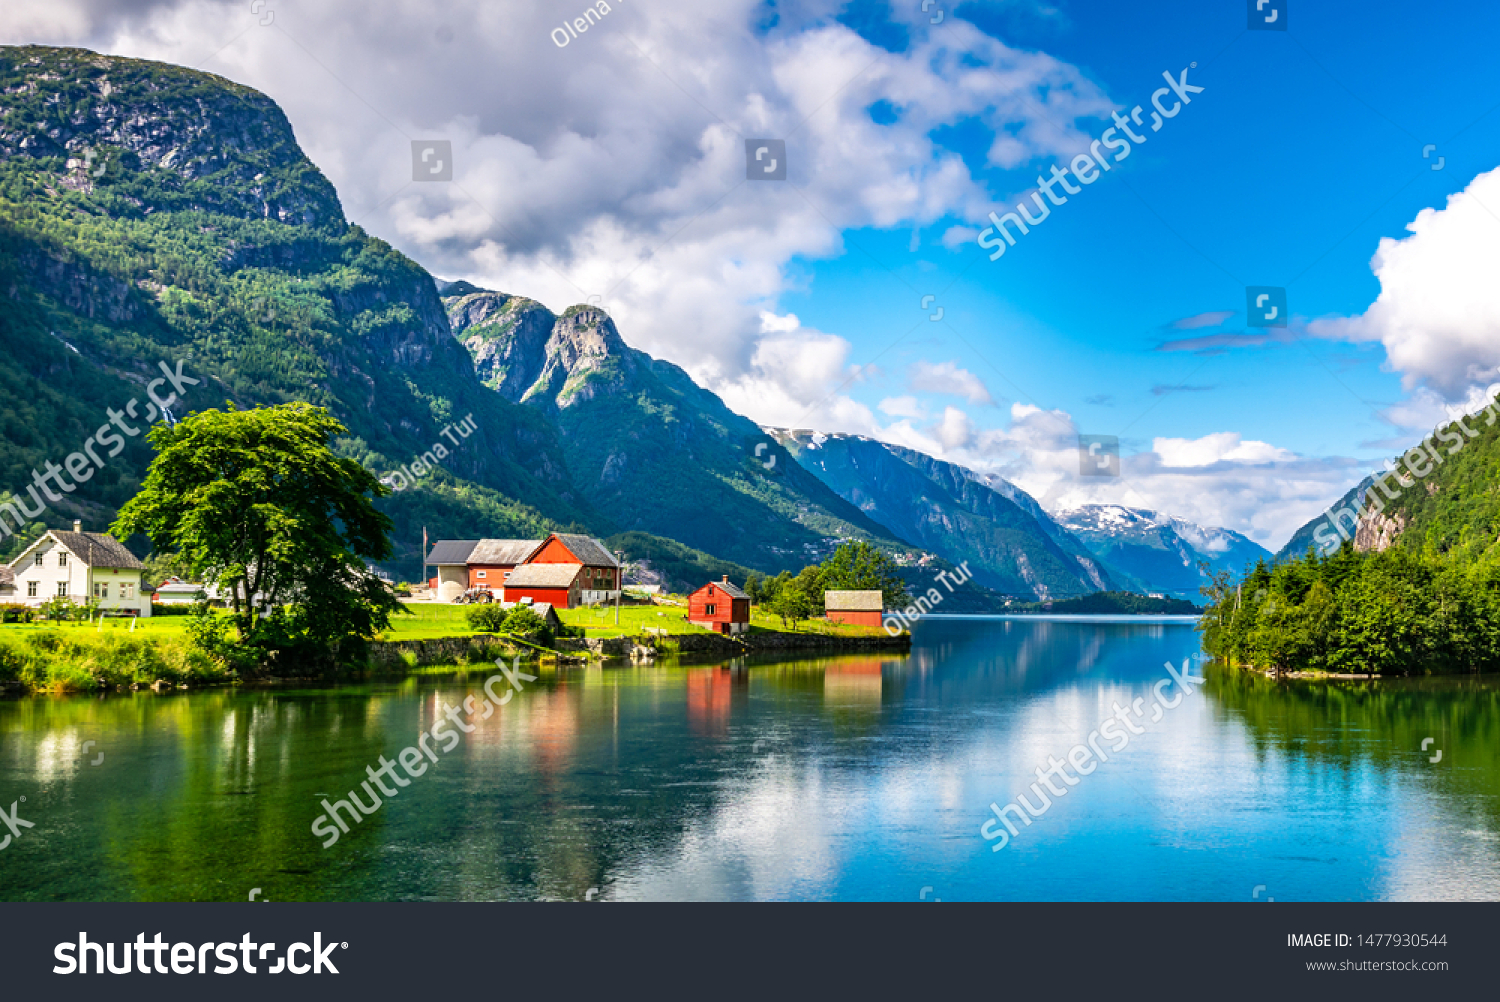 Amazing nature view with fjord and mountains. Beautiful reflection. Location: Scandinavian Mountains, Norway. Artistic picture. Beauty world. The feeling of complete freedom #1477930544